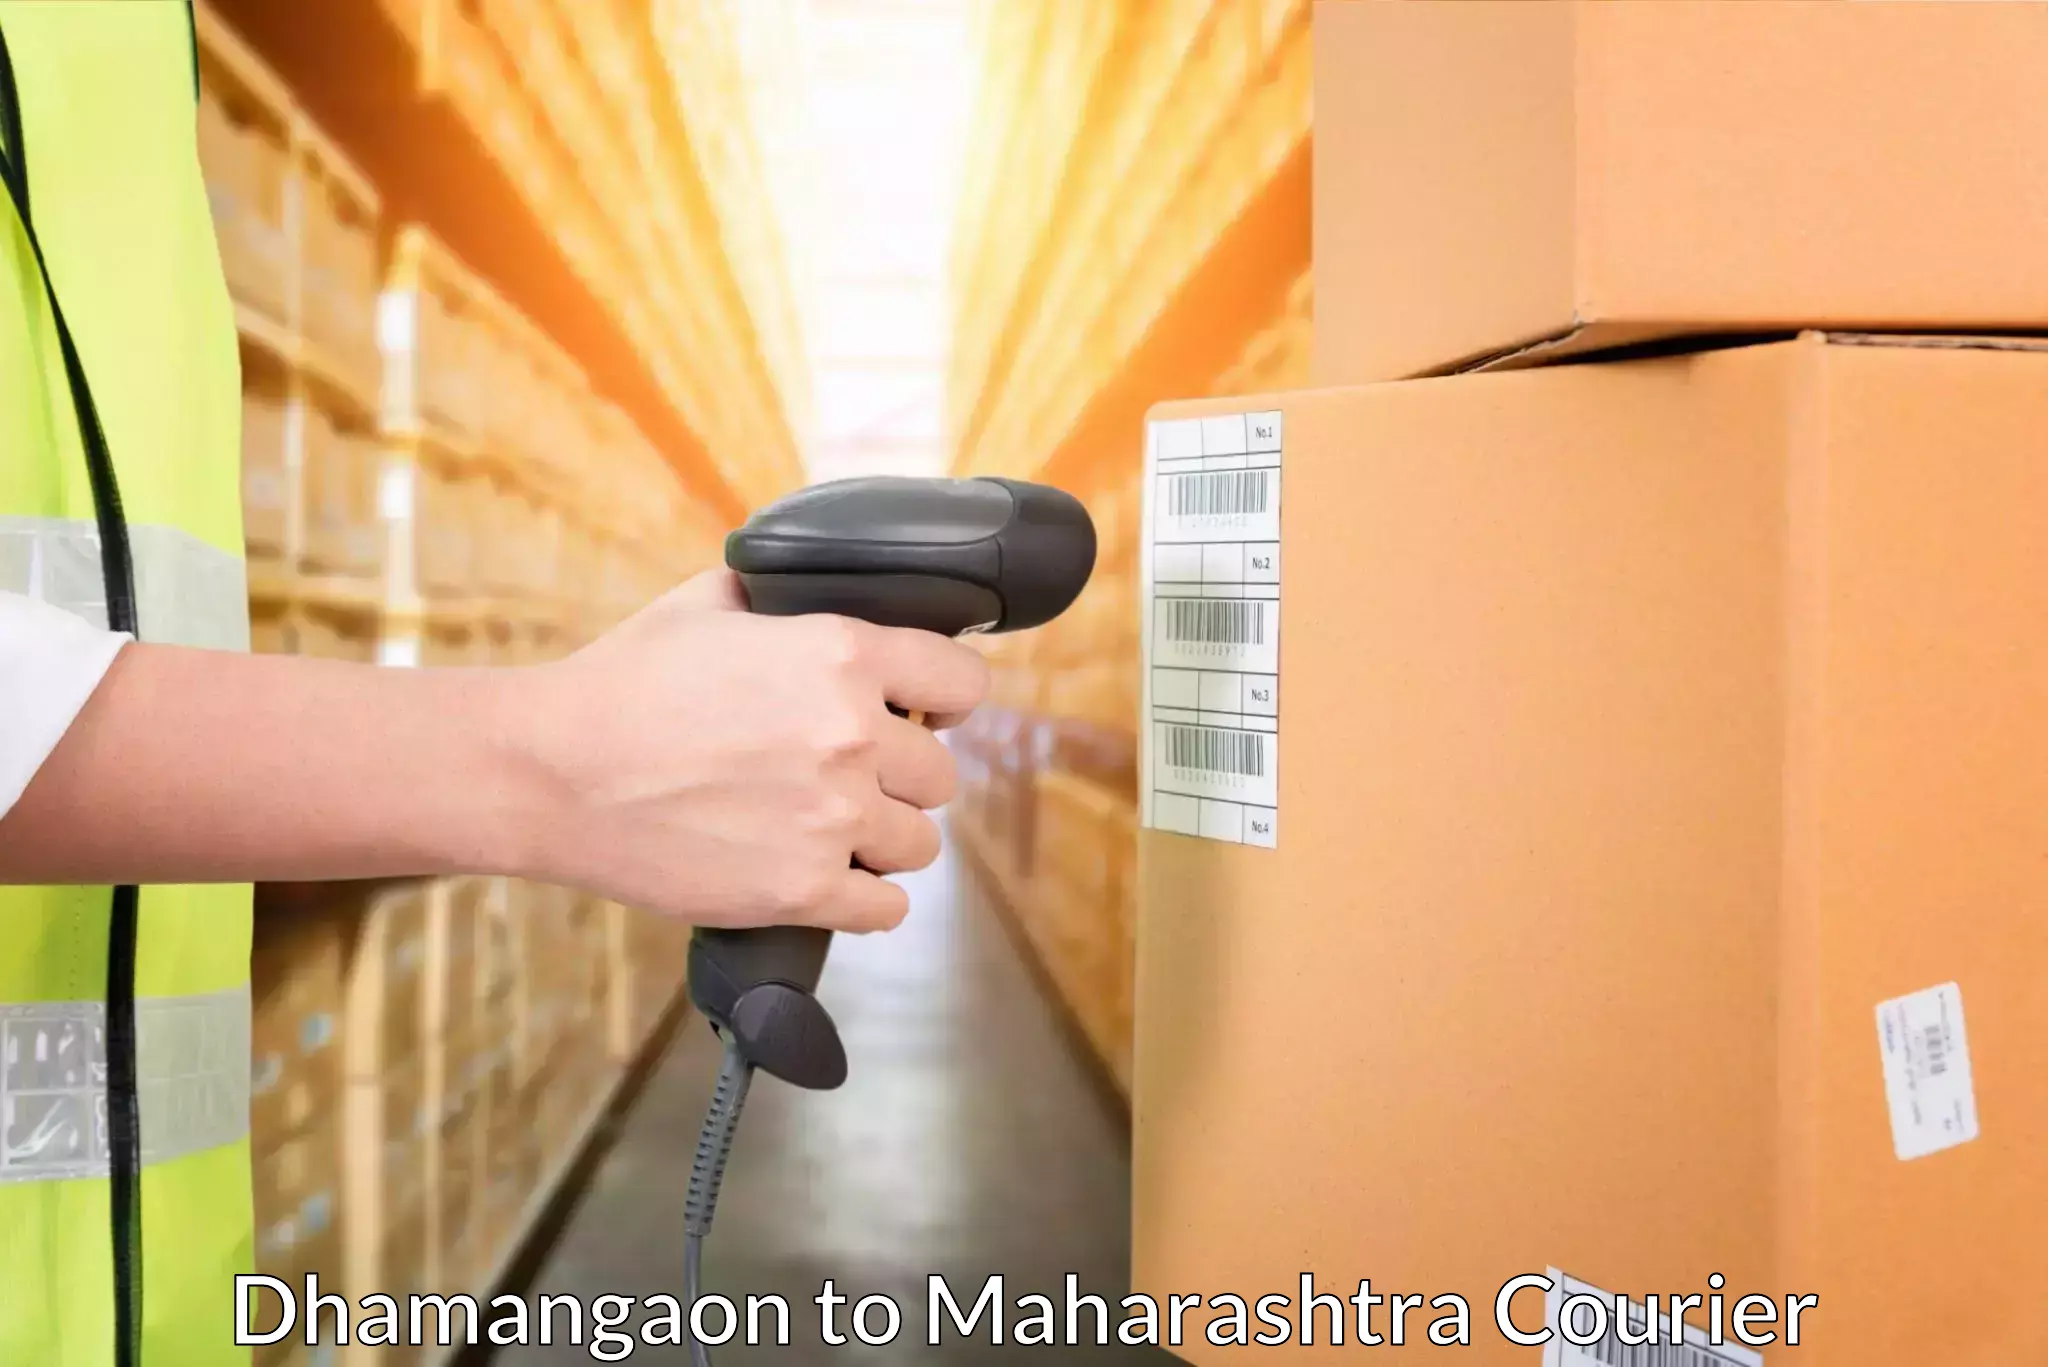 Speedy delivery service Dhamangaon to Talegaon Dabhade